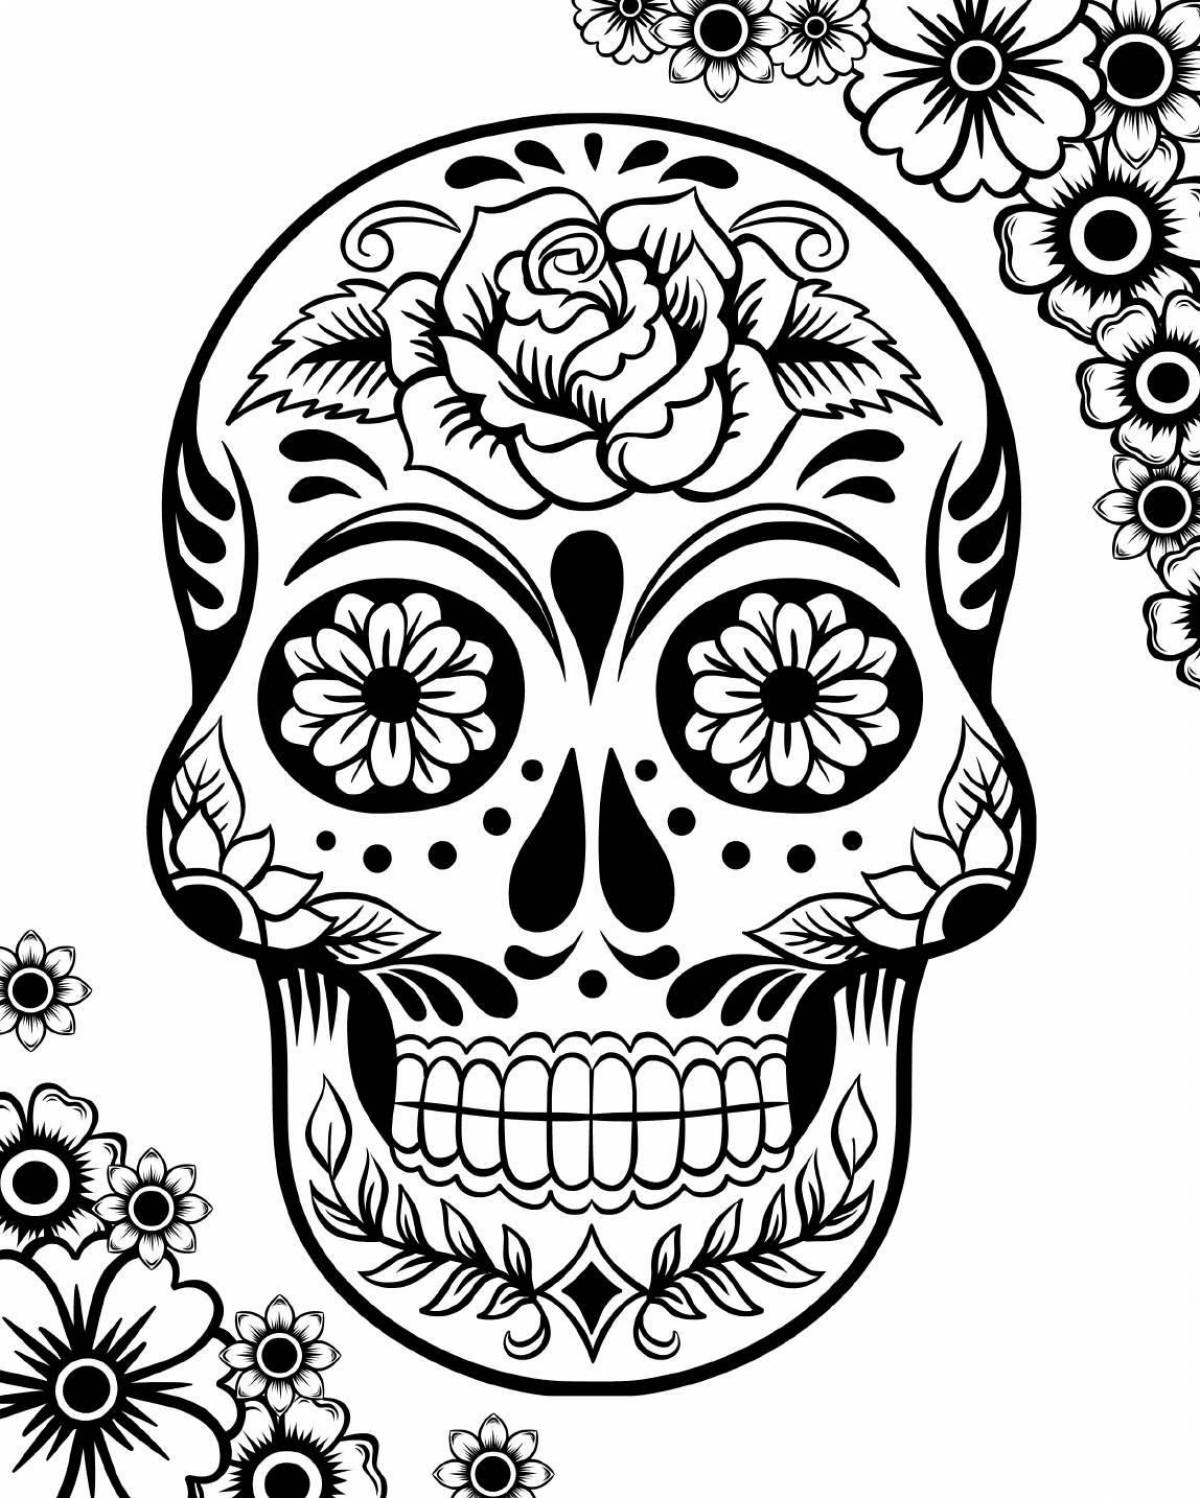 Delightful coloring of the skull